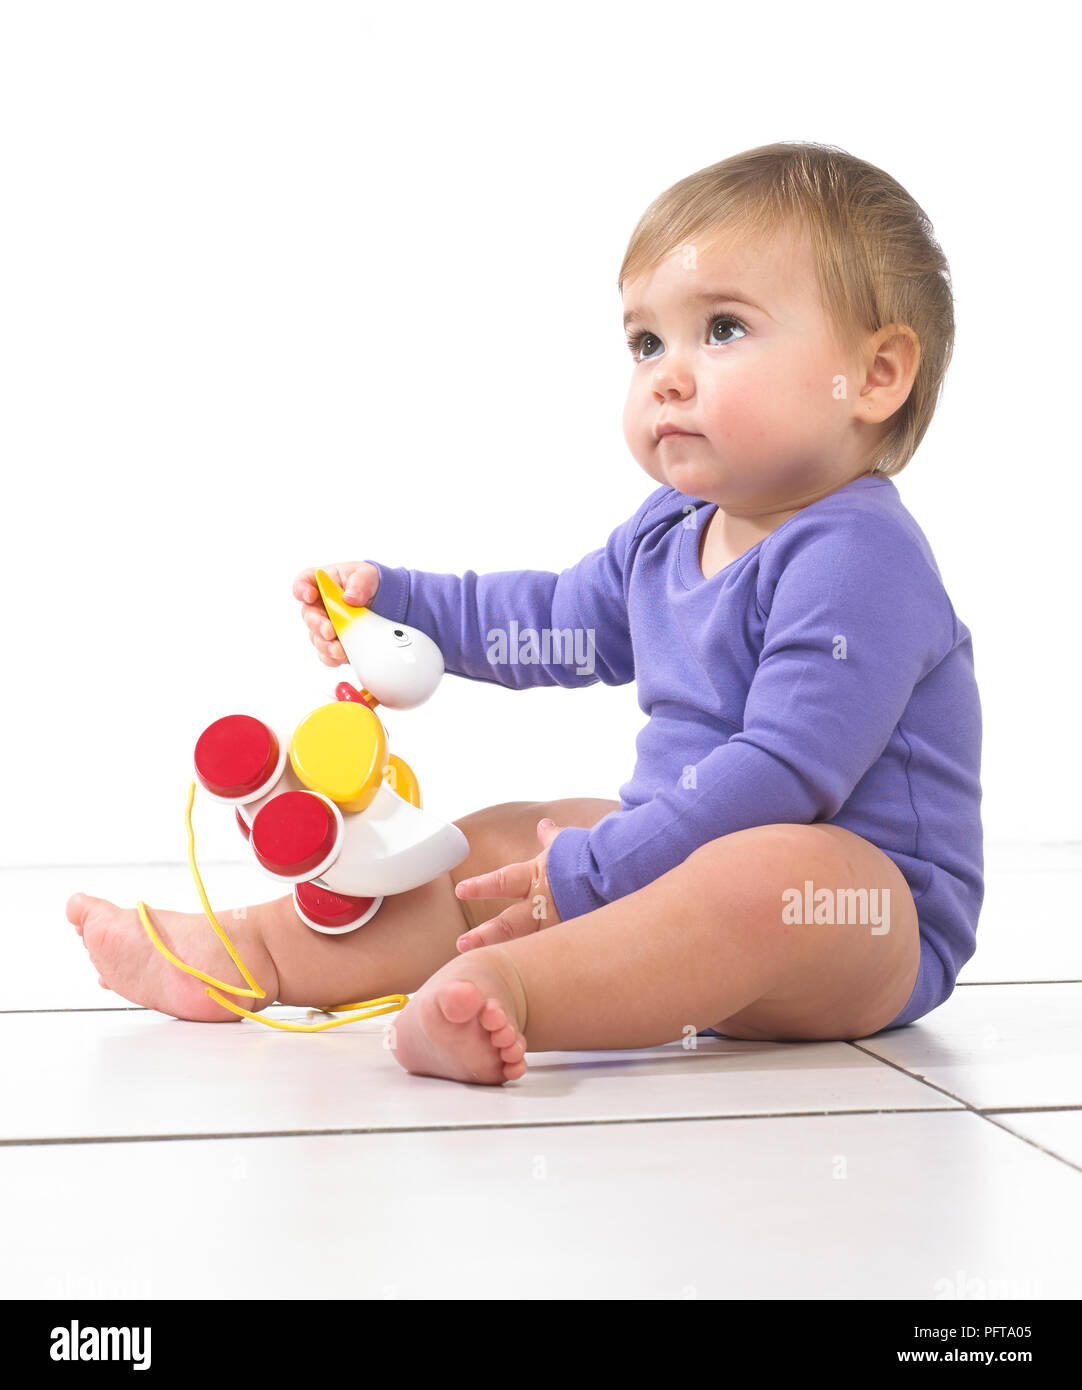 Baby girl sitting playing with pull along toy duck, 12 months Stock Photo